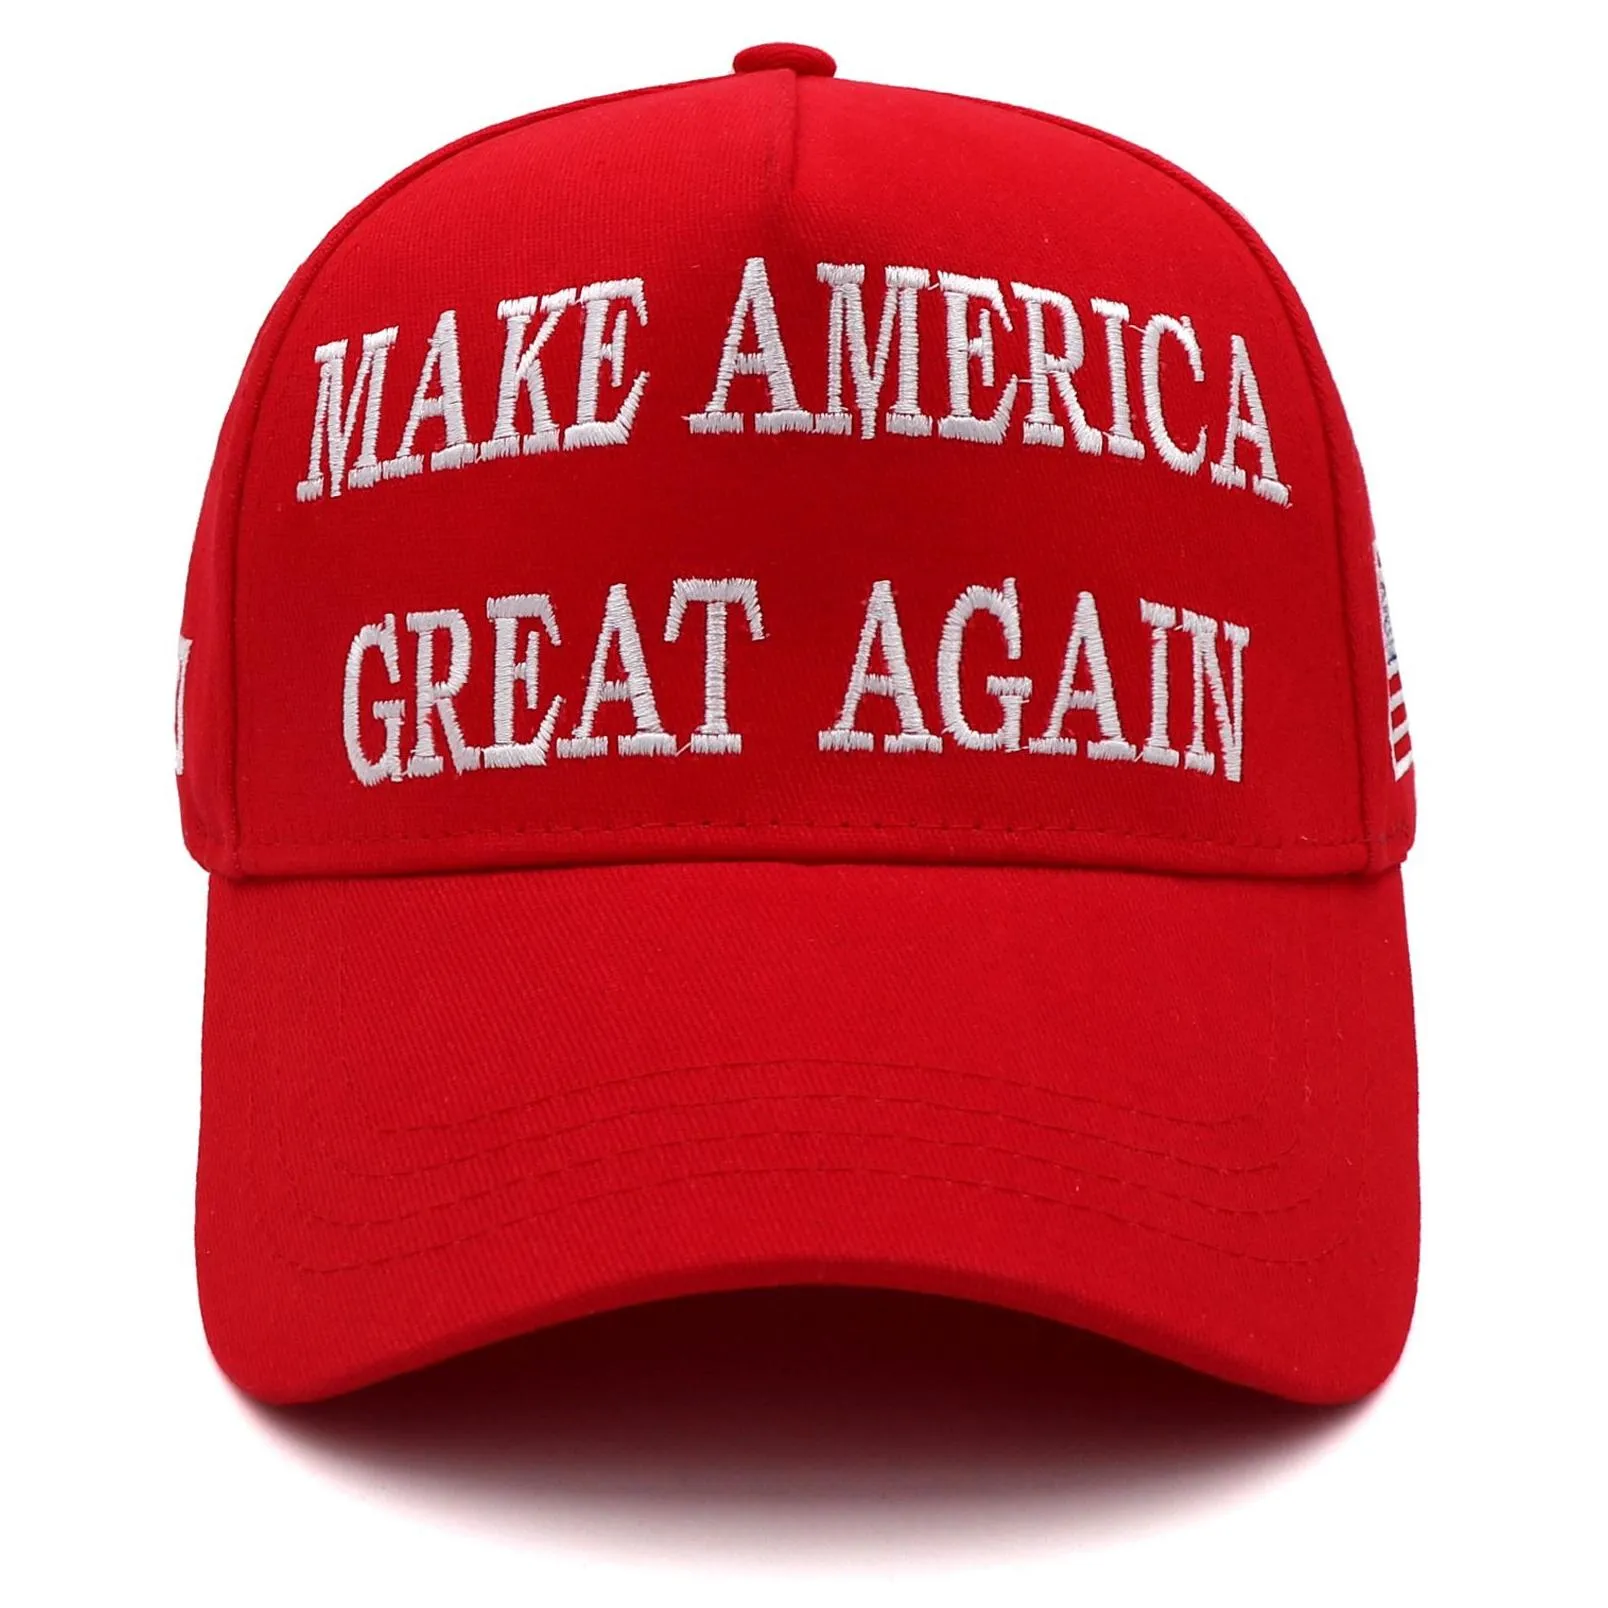 Party Hats Trump Activity Party Hats Cotton Embroidery Basebal Cap 45-47Th Make America Great Again Sports Hatdonald 2024 S Presidenti Ot2Rs